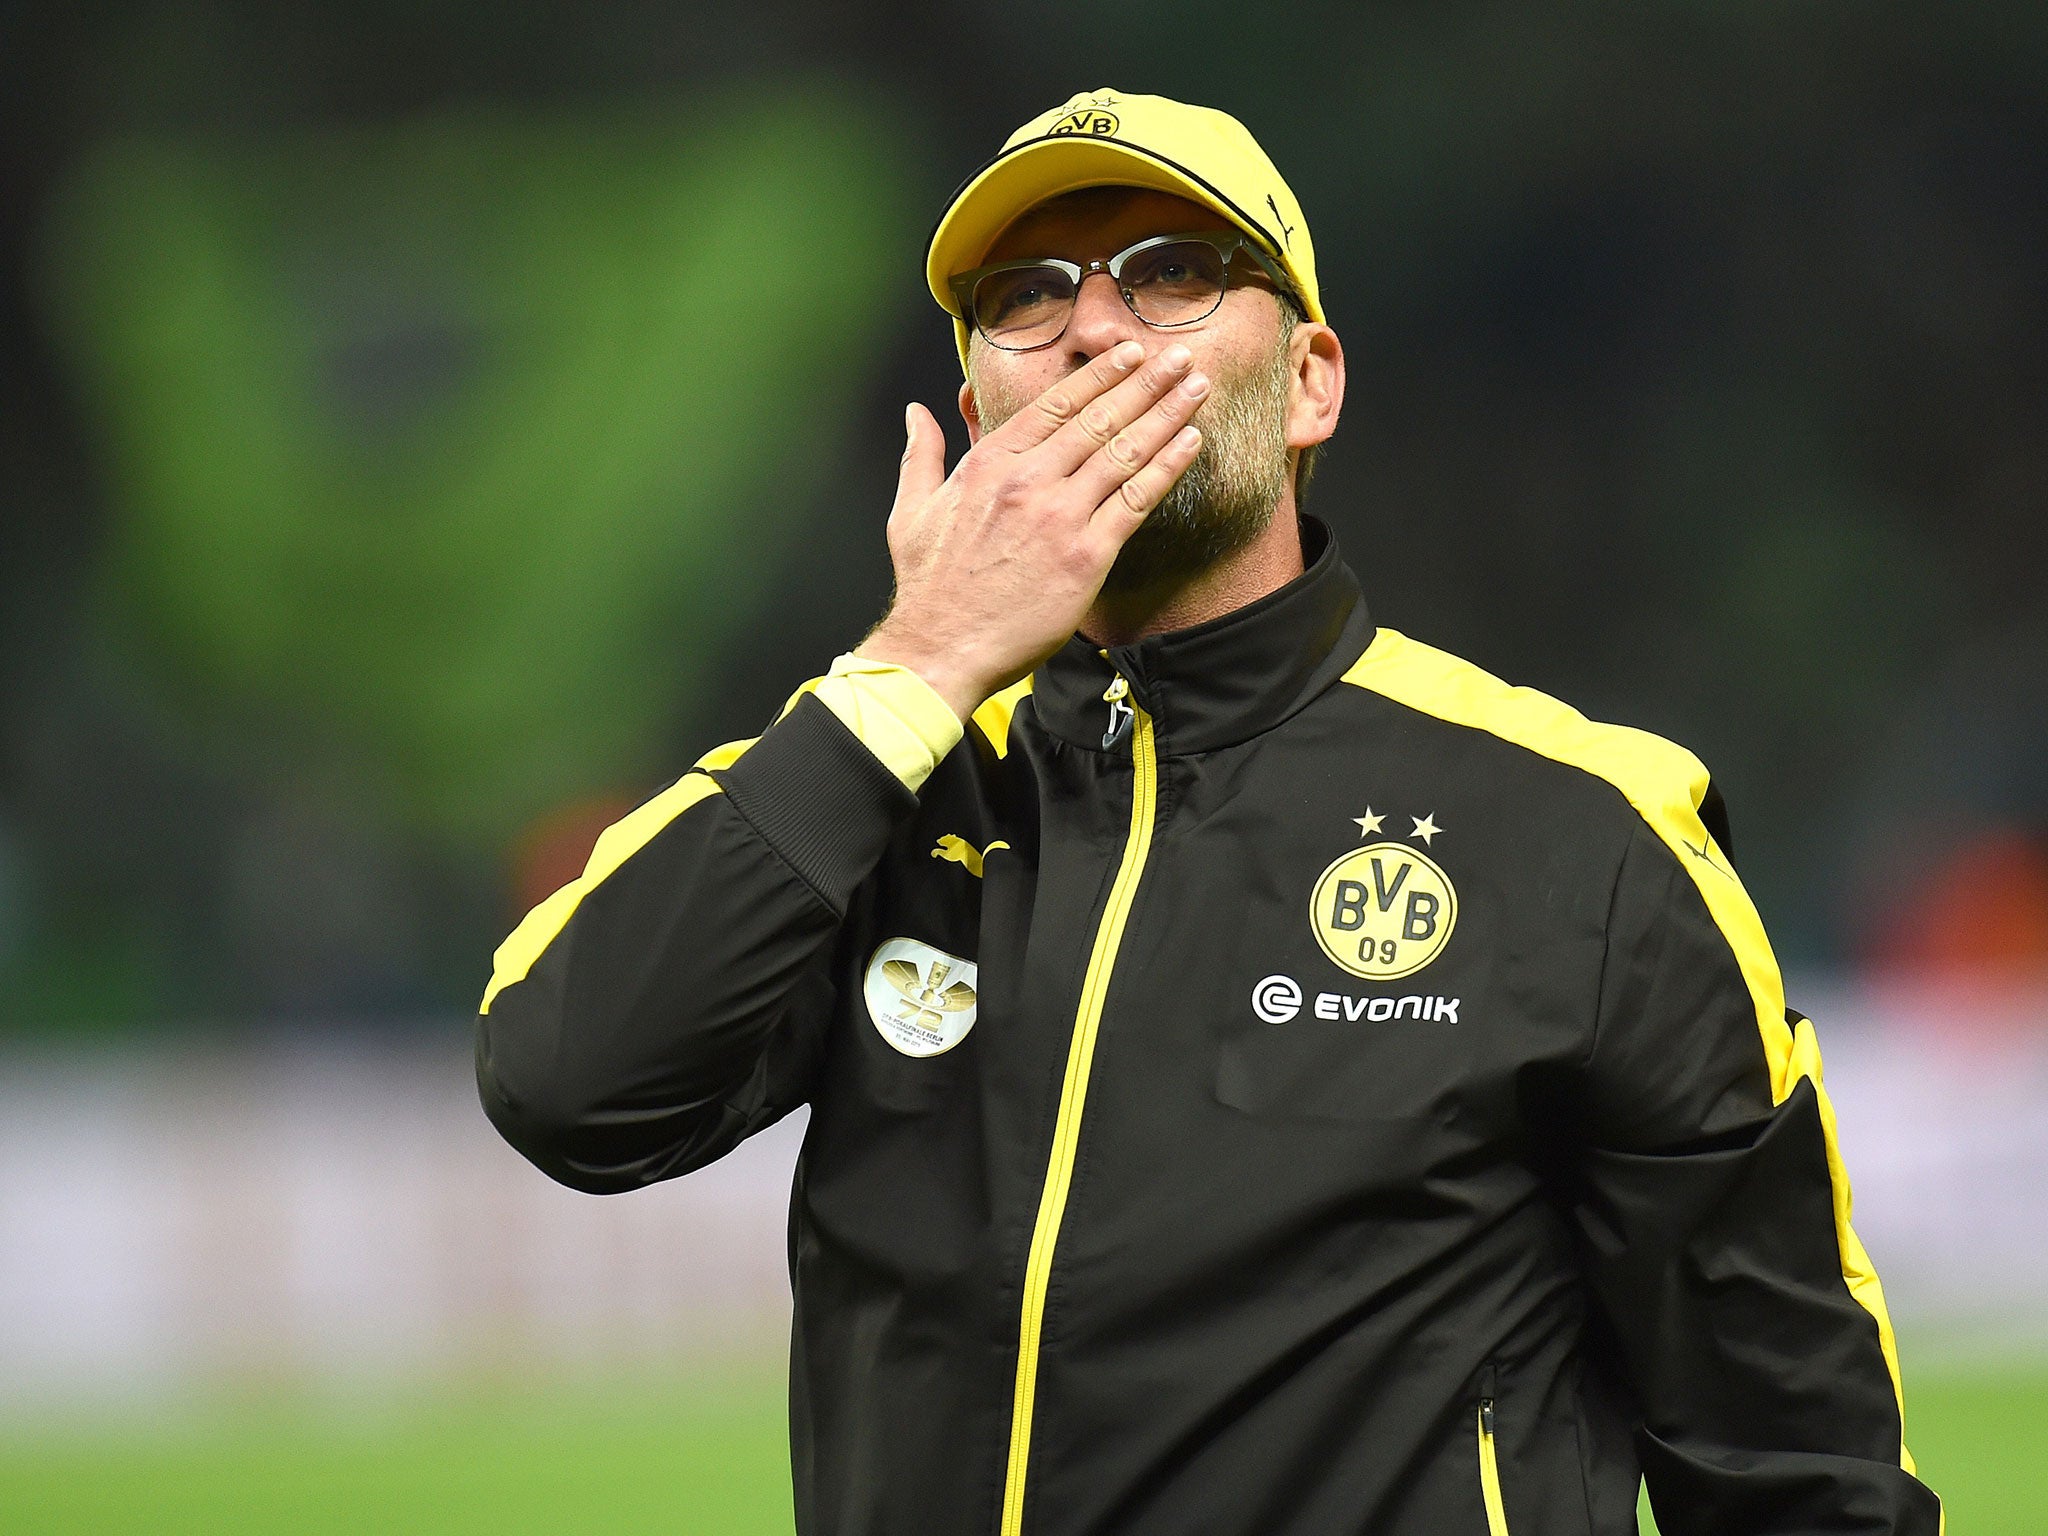 Jurgen Klopp could be on his way to Anfield